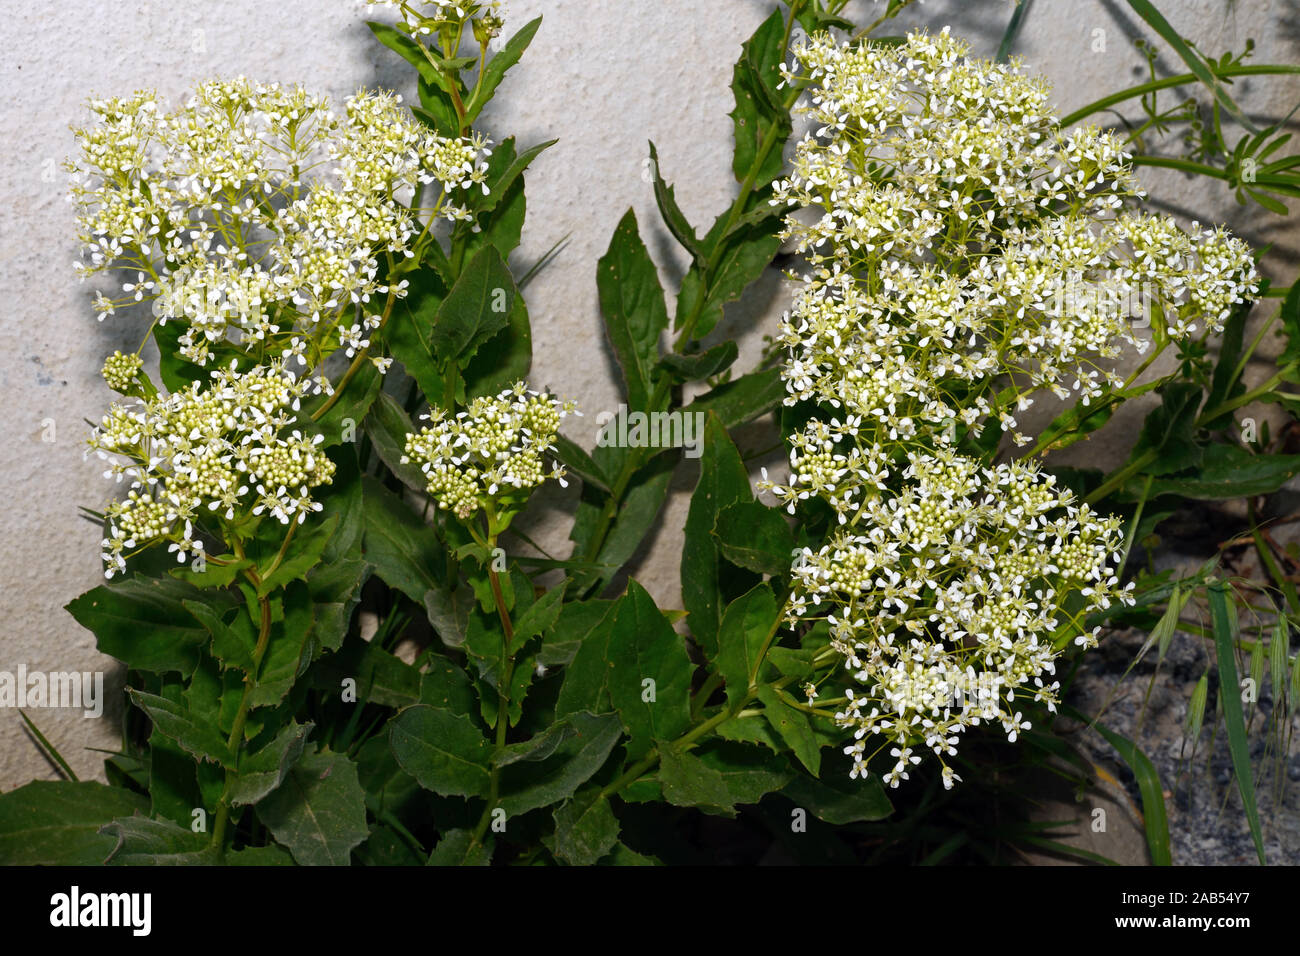 Lepidium draba (hoary cress) is native to western Asia and southeastern Europe It occurs disturbed soils especially road-sides and pastures. Stock Photo